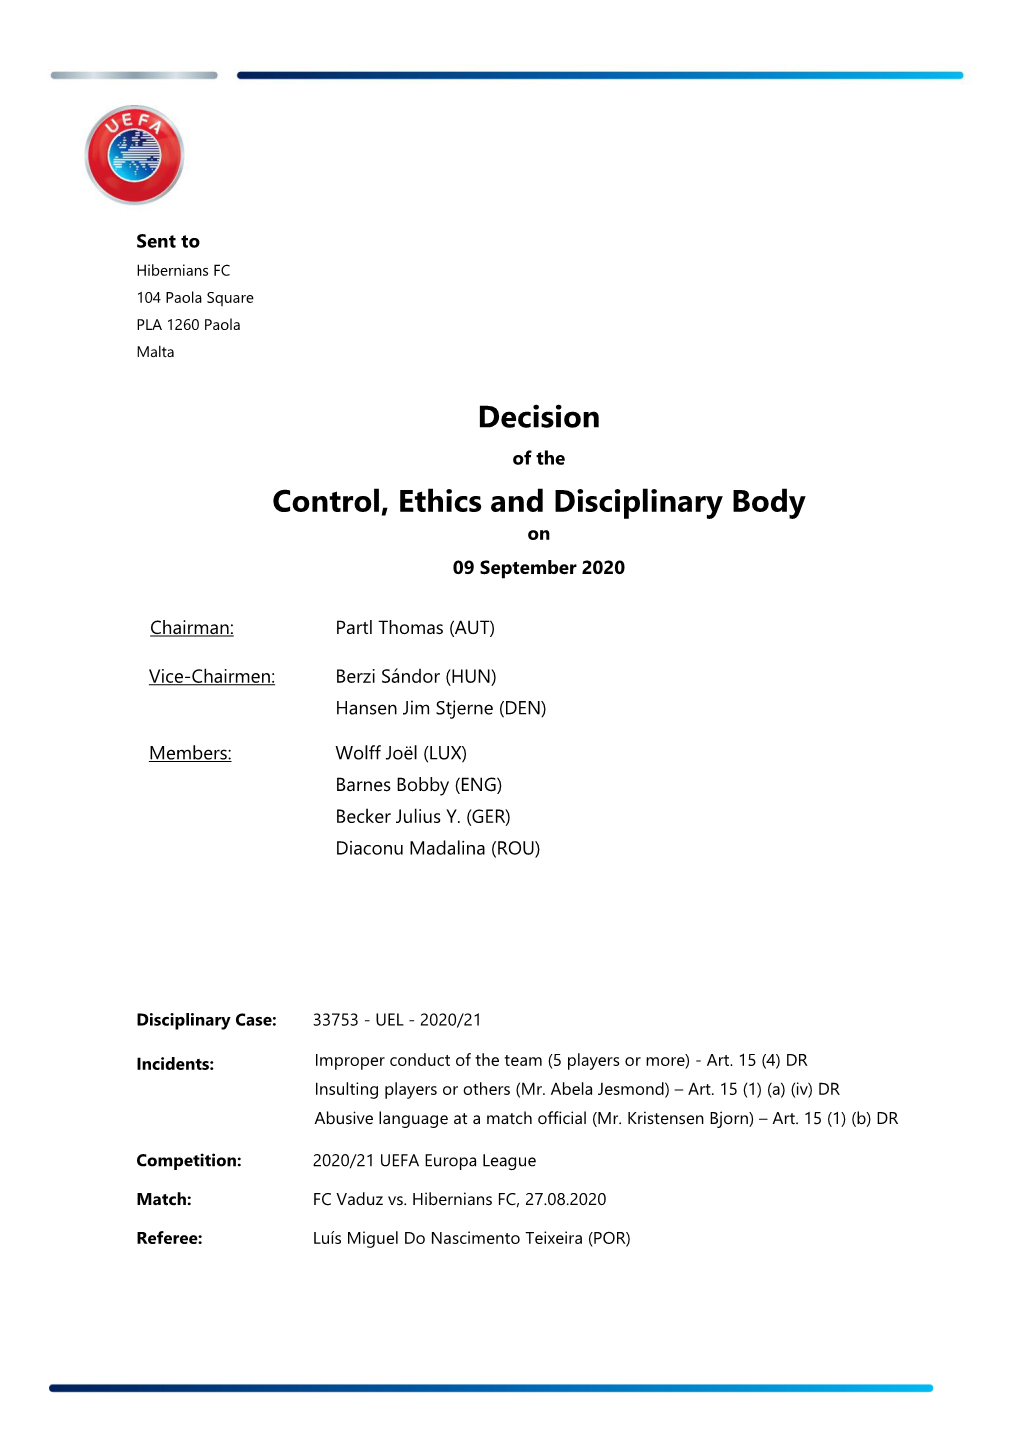 Decision Control, Ethics and Disciplinary Body